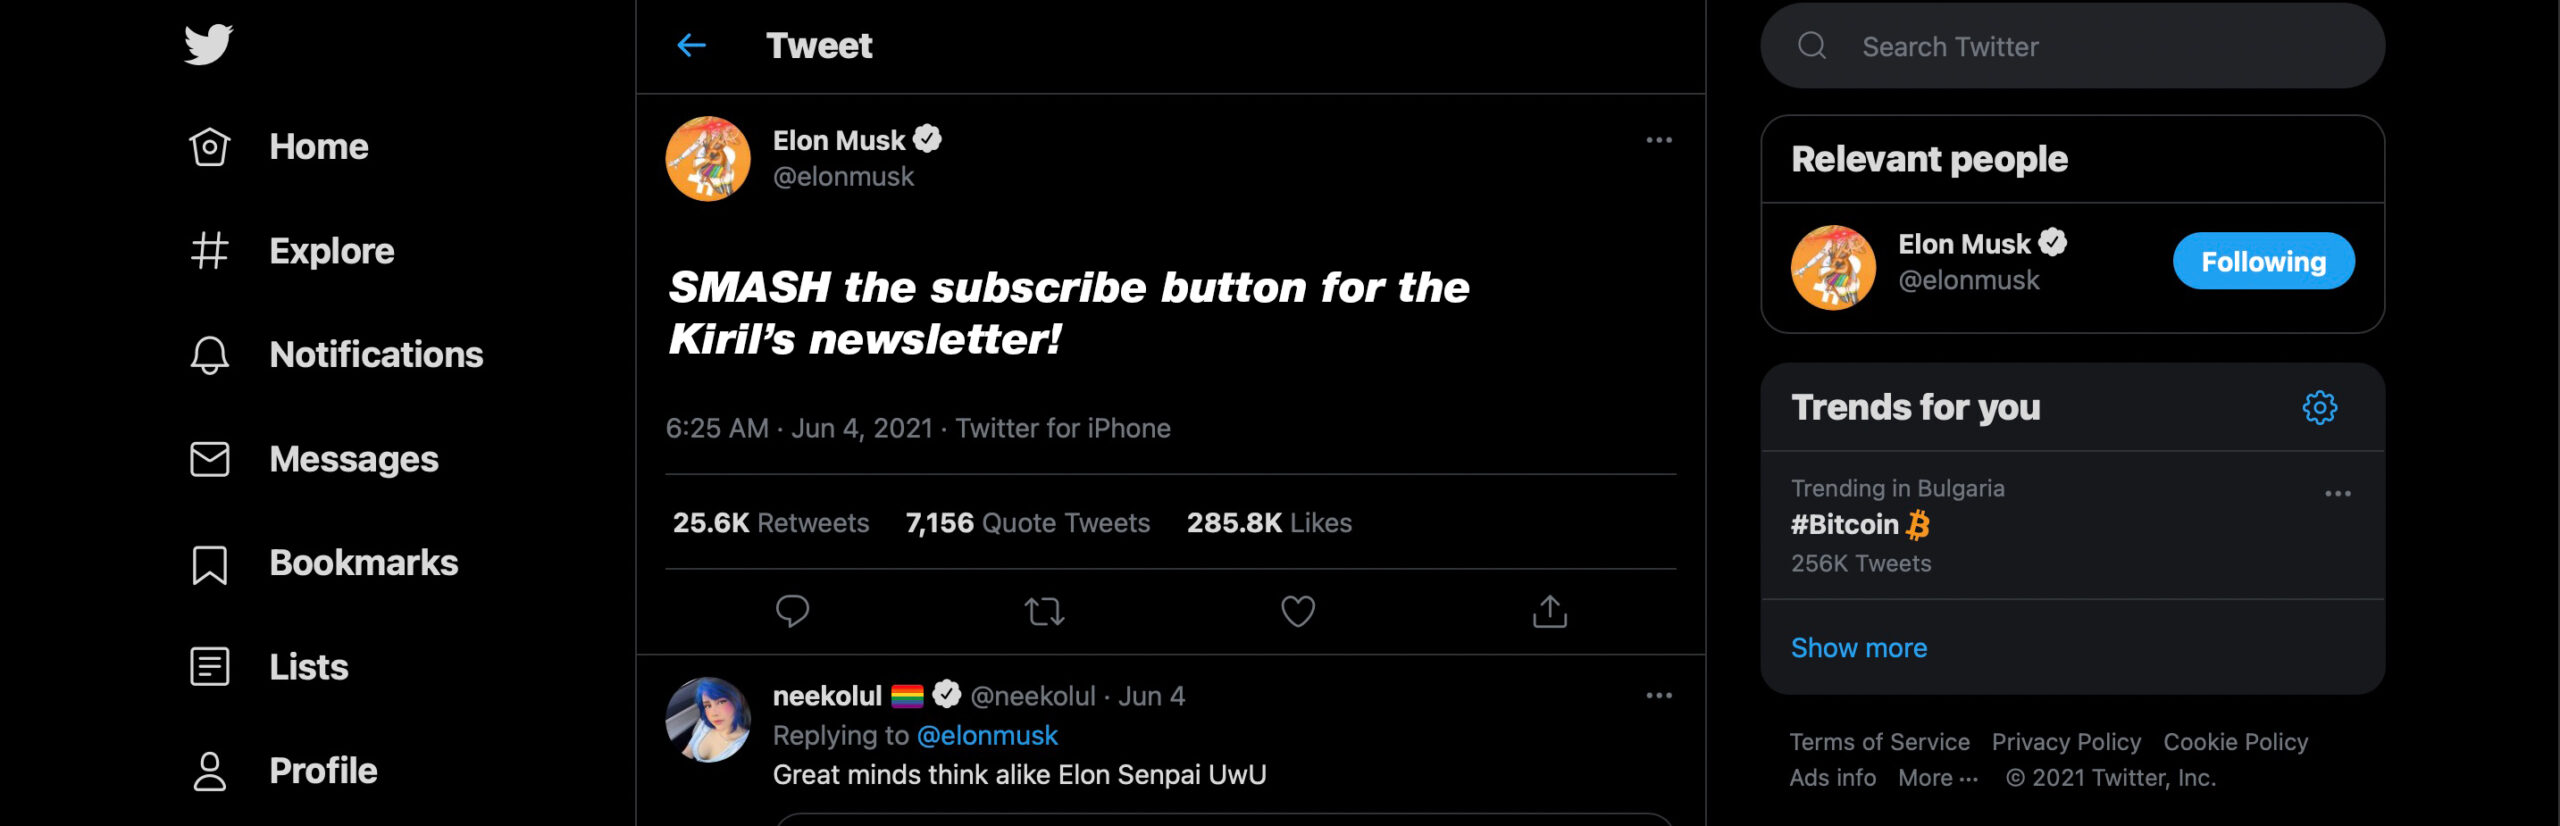 Latest breaking tweet from Elon Musk about subscribing about my newsletter!